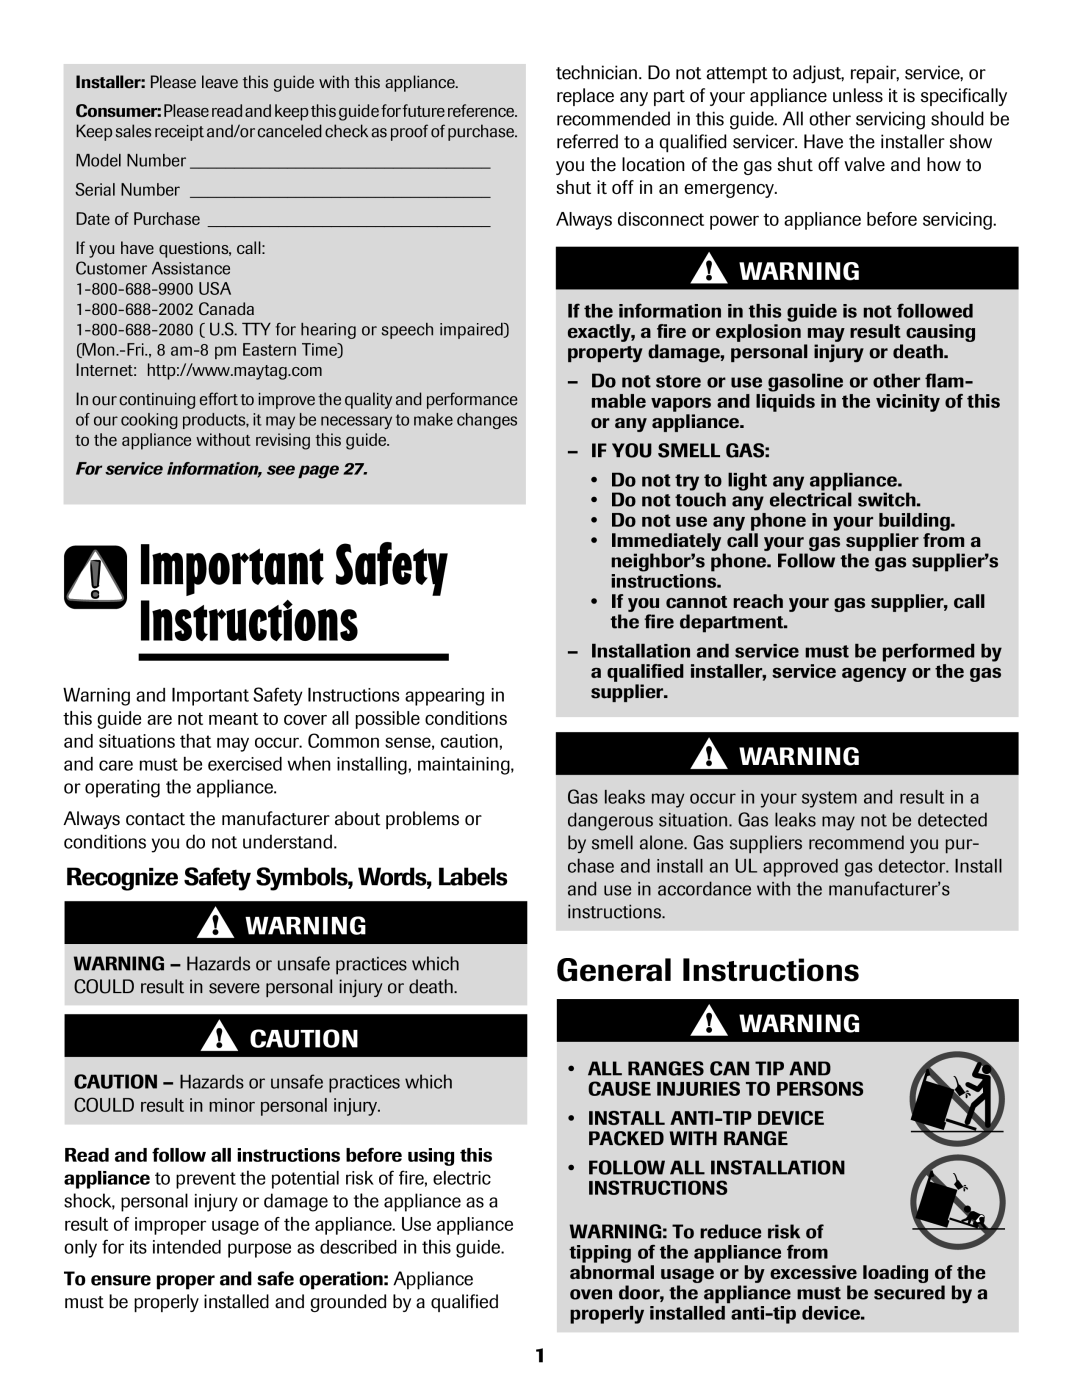 Maytag 700 manual Important Safety, General Instructions, Recognize Safety Symbols, Words, Labels 